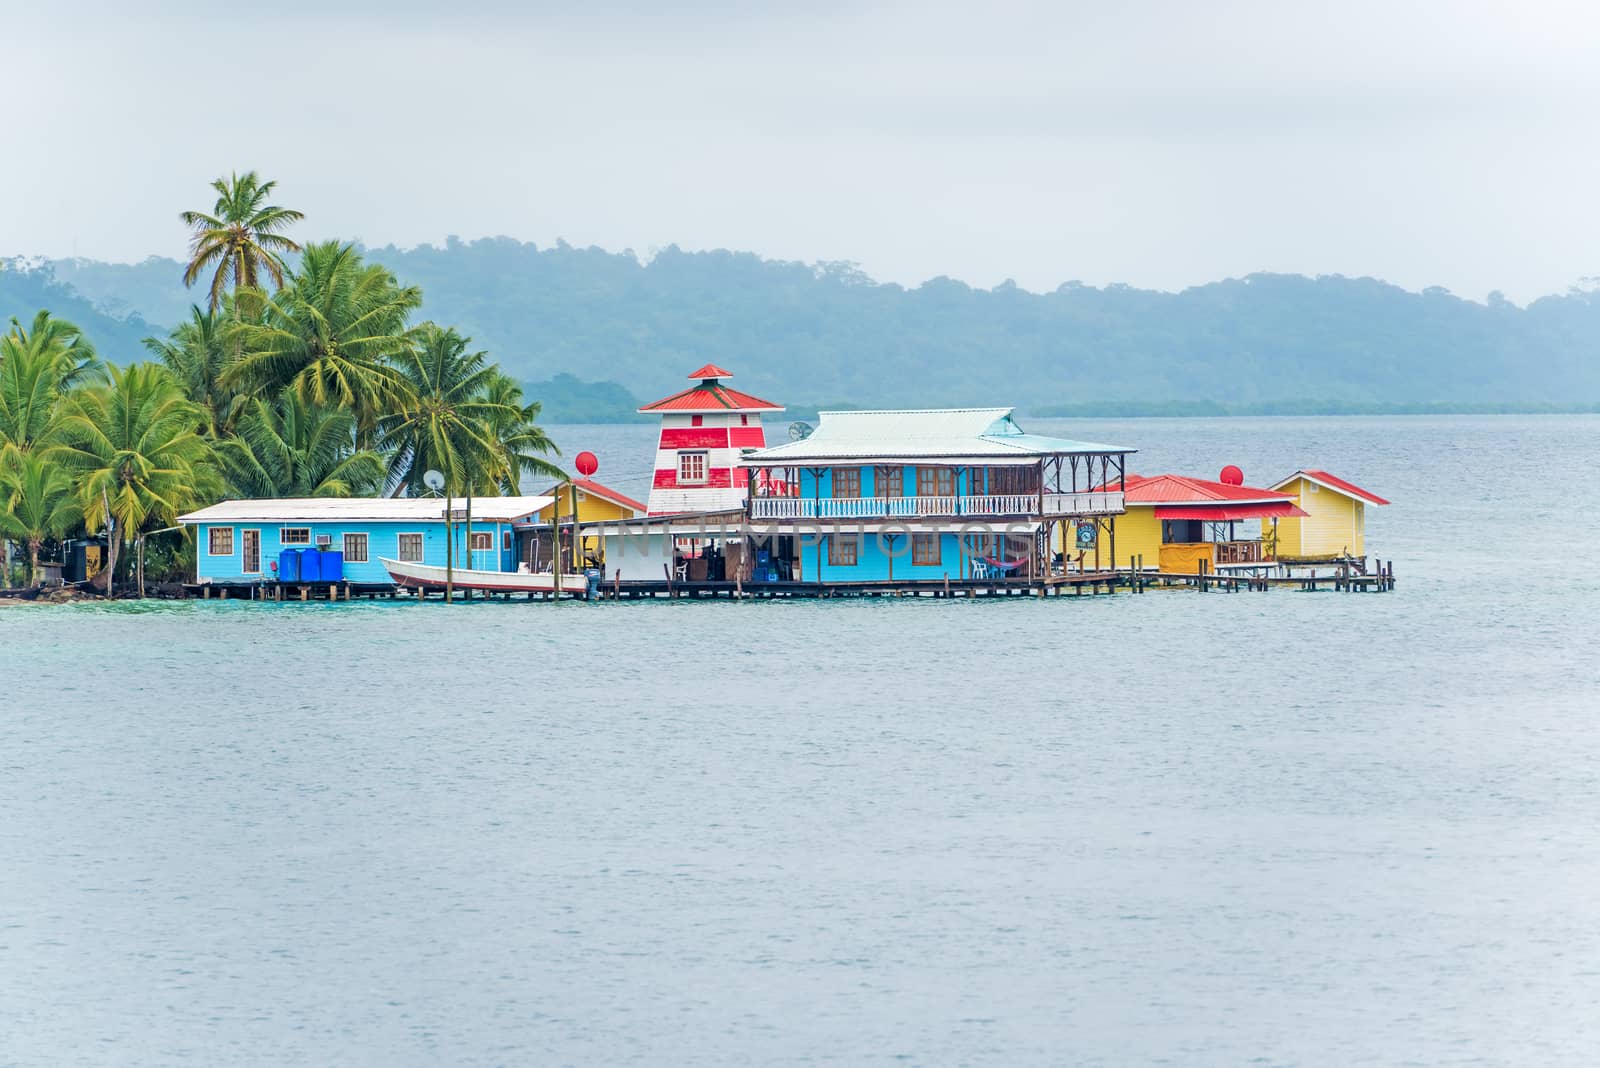 Houses on the water in Bocas del Toro, Panama on January 5, 2014